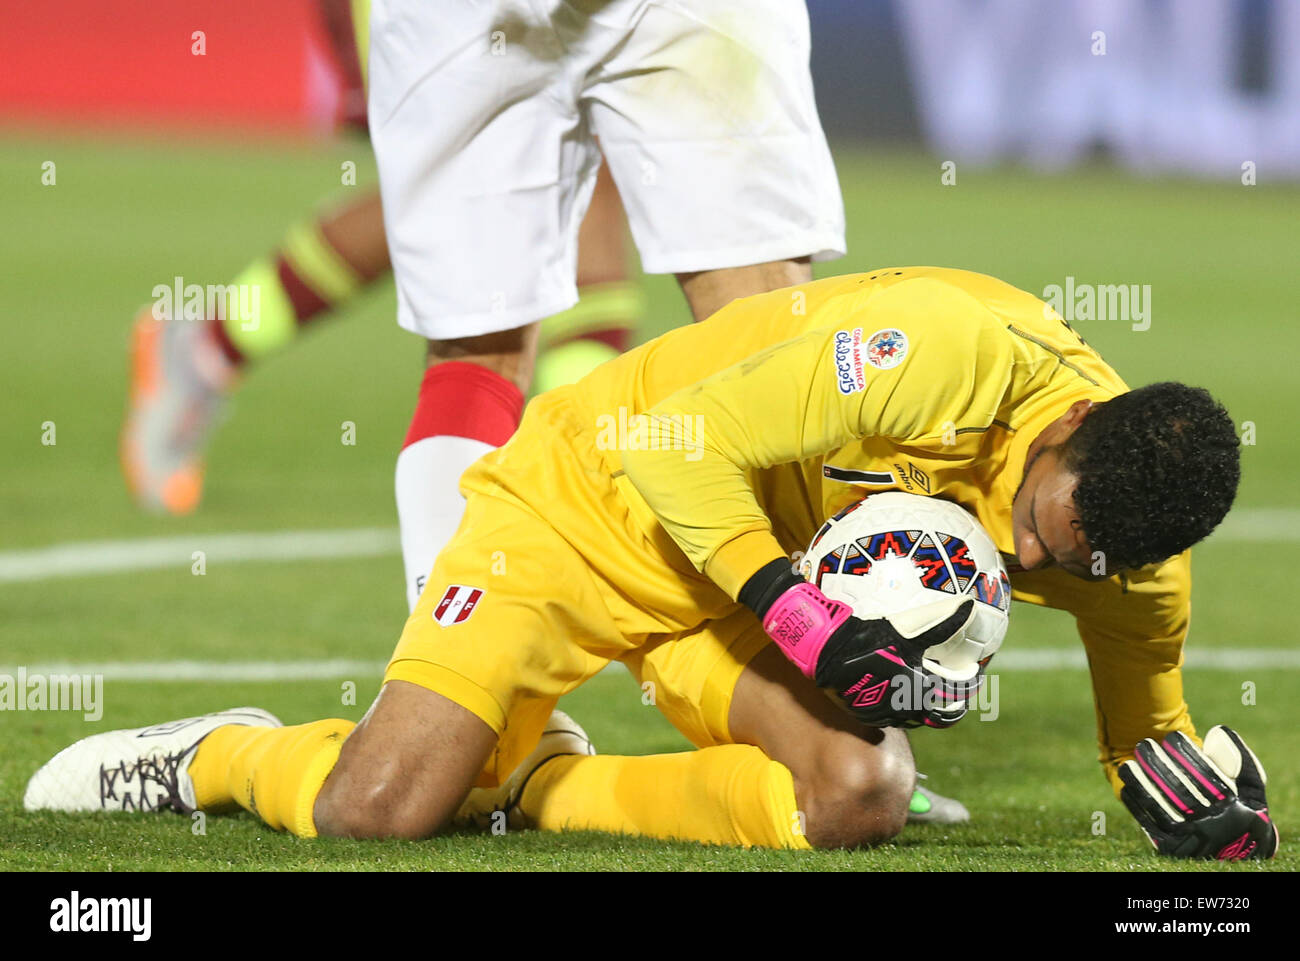 Valparaiso, Chile. 18th June, 2015. Peru's goalie Pedro Gallese saves the ball during the group C match against Venezuela of 2015 American Cup in Valparaiso, Chile, June 18, 2015. Peru won 1-0. Credit:  Rong Hao/Xinhua/Alamy Live News Stock Photo